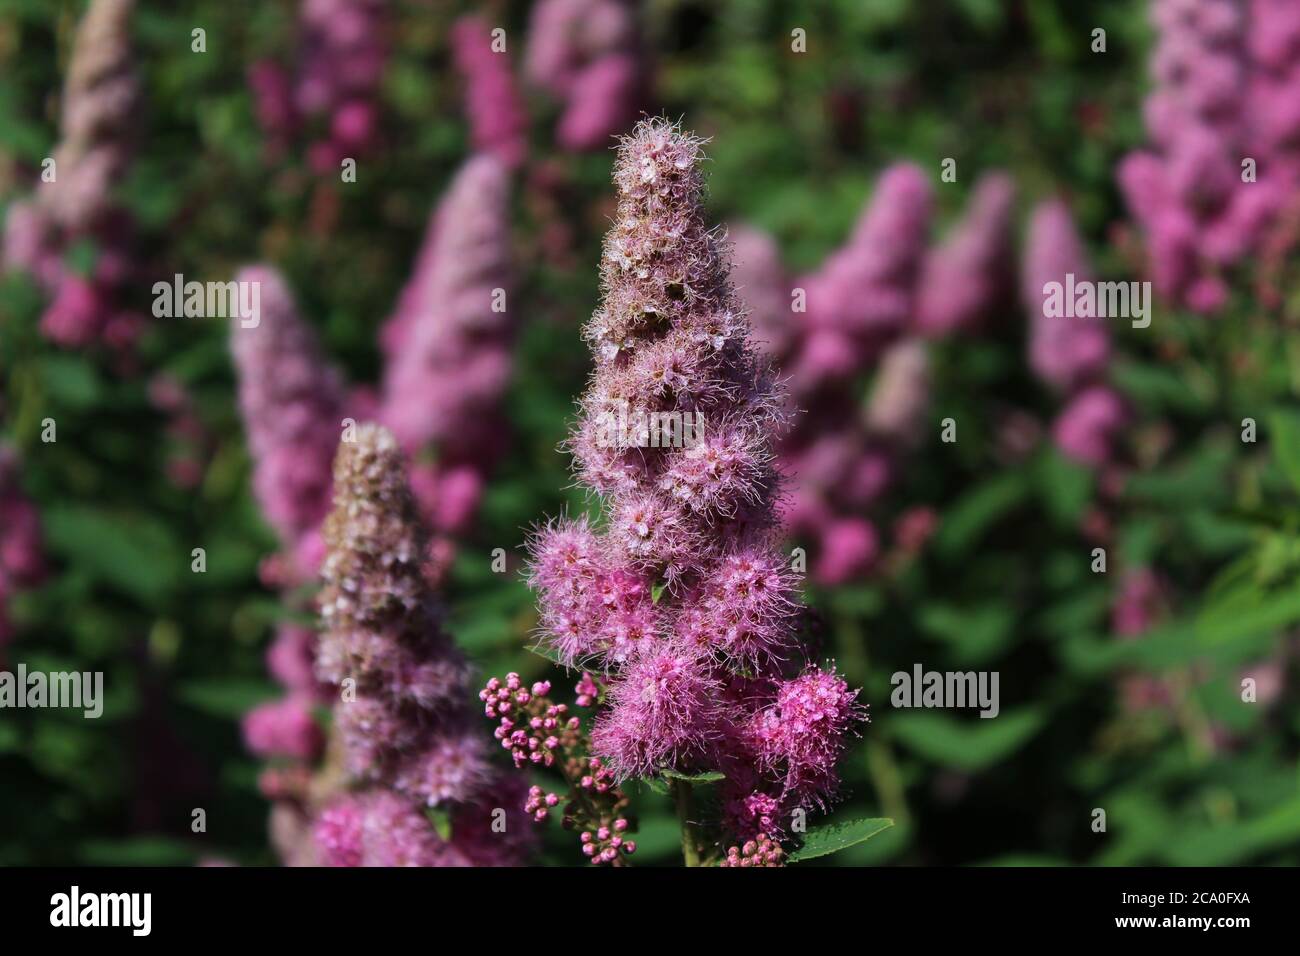 The picture shows blossoming bridewort in the garden Stock Photo